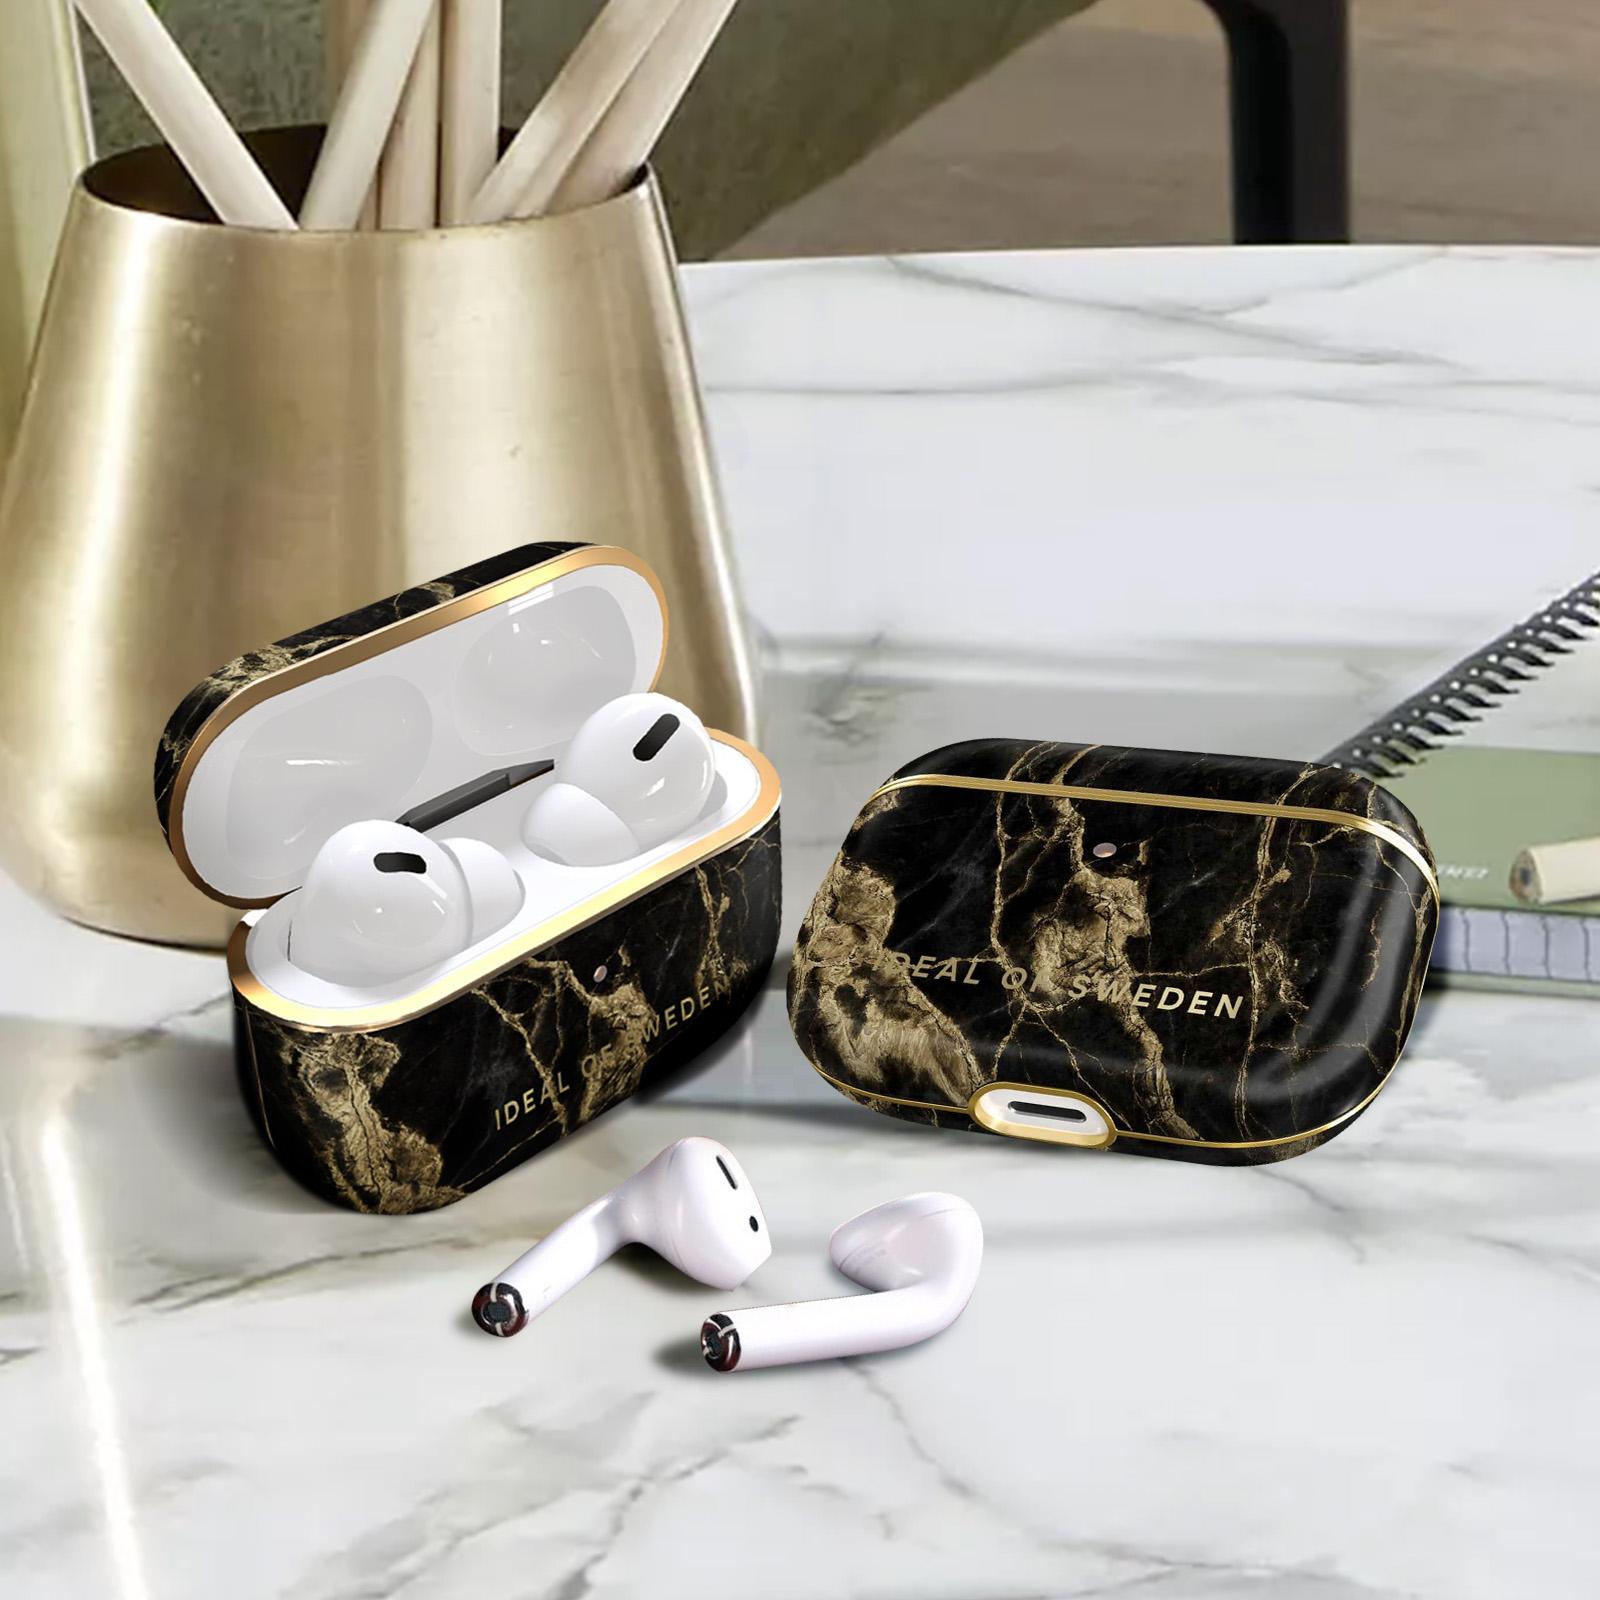 Smoke Marble AirPod Full SWEDEN Cover IDFAPC-PRO-191 Apple passend Golden für: IDEAL OF Case